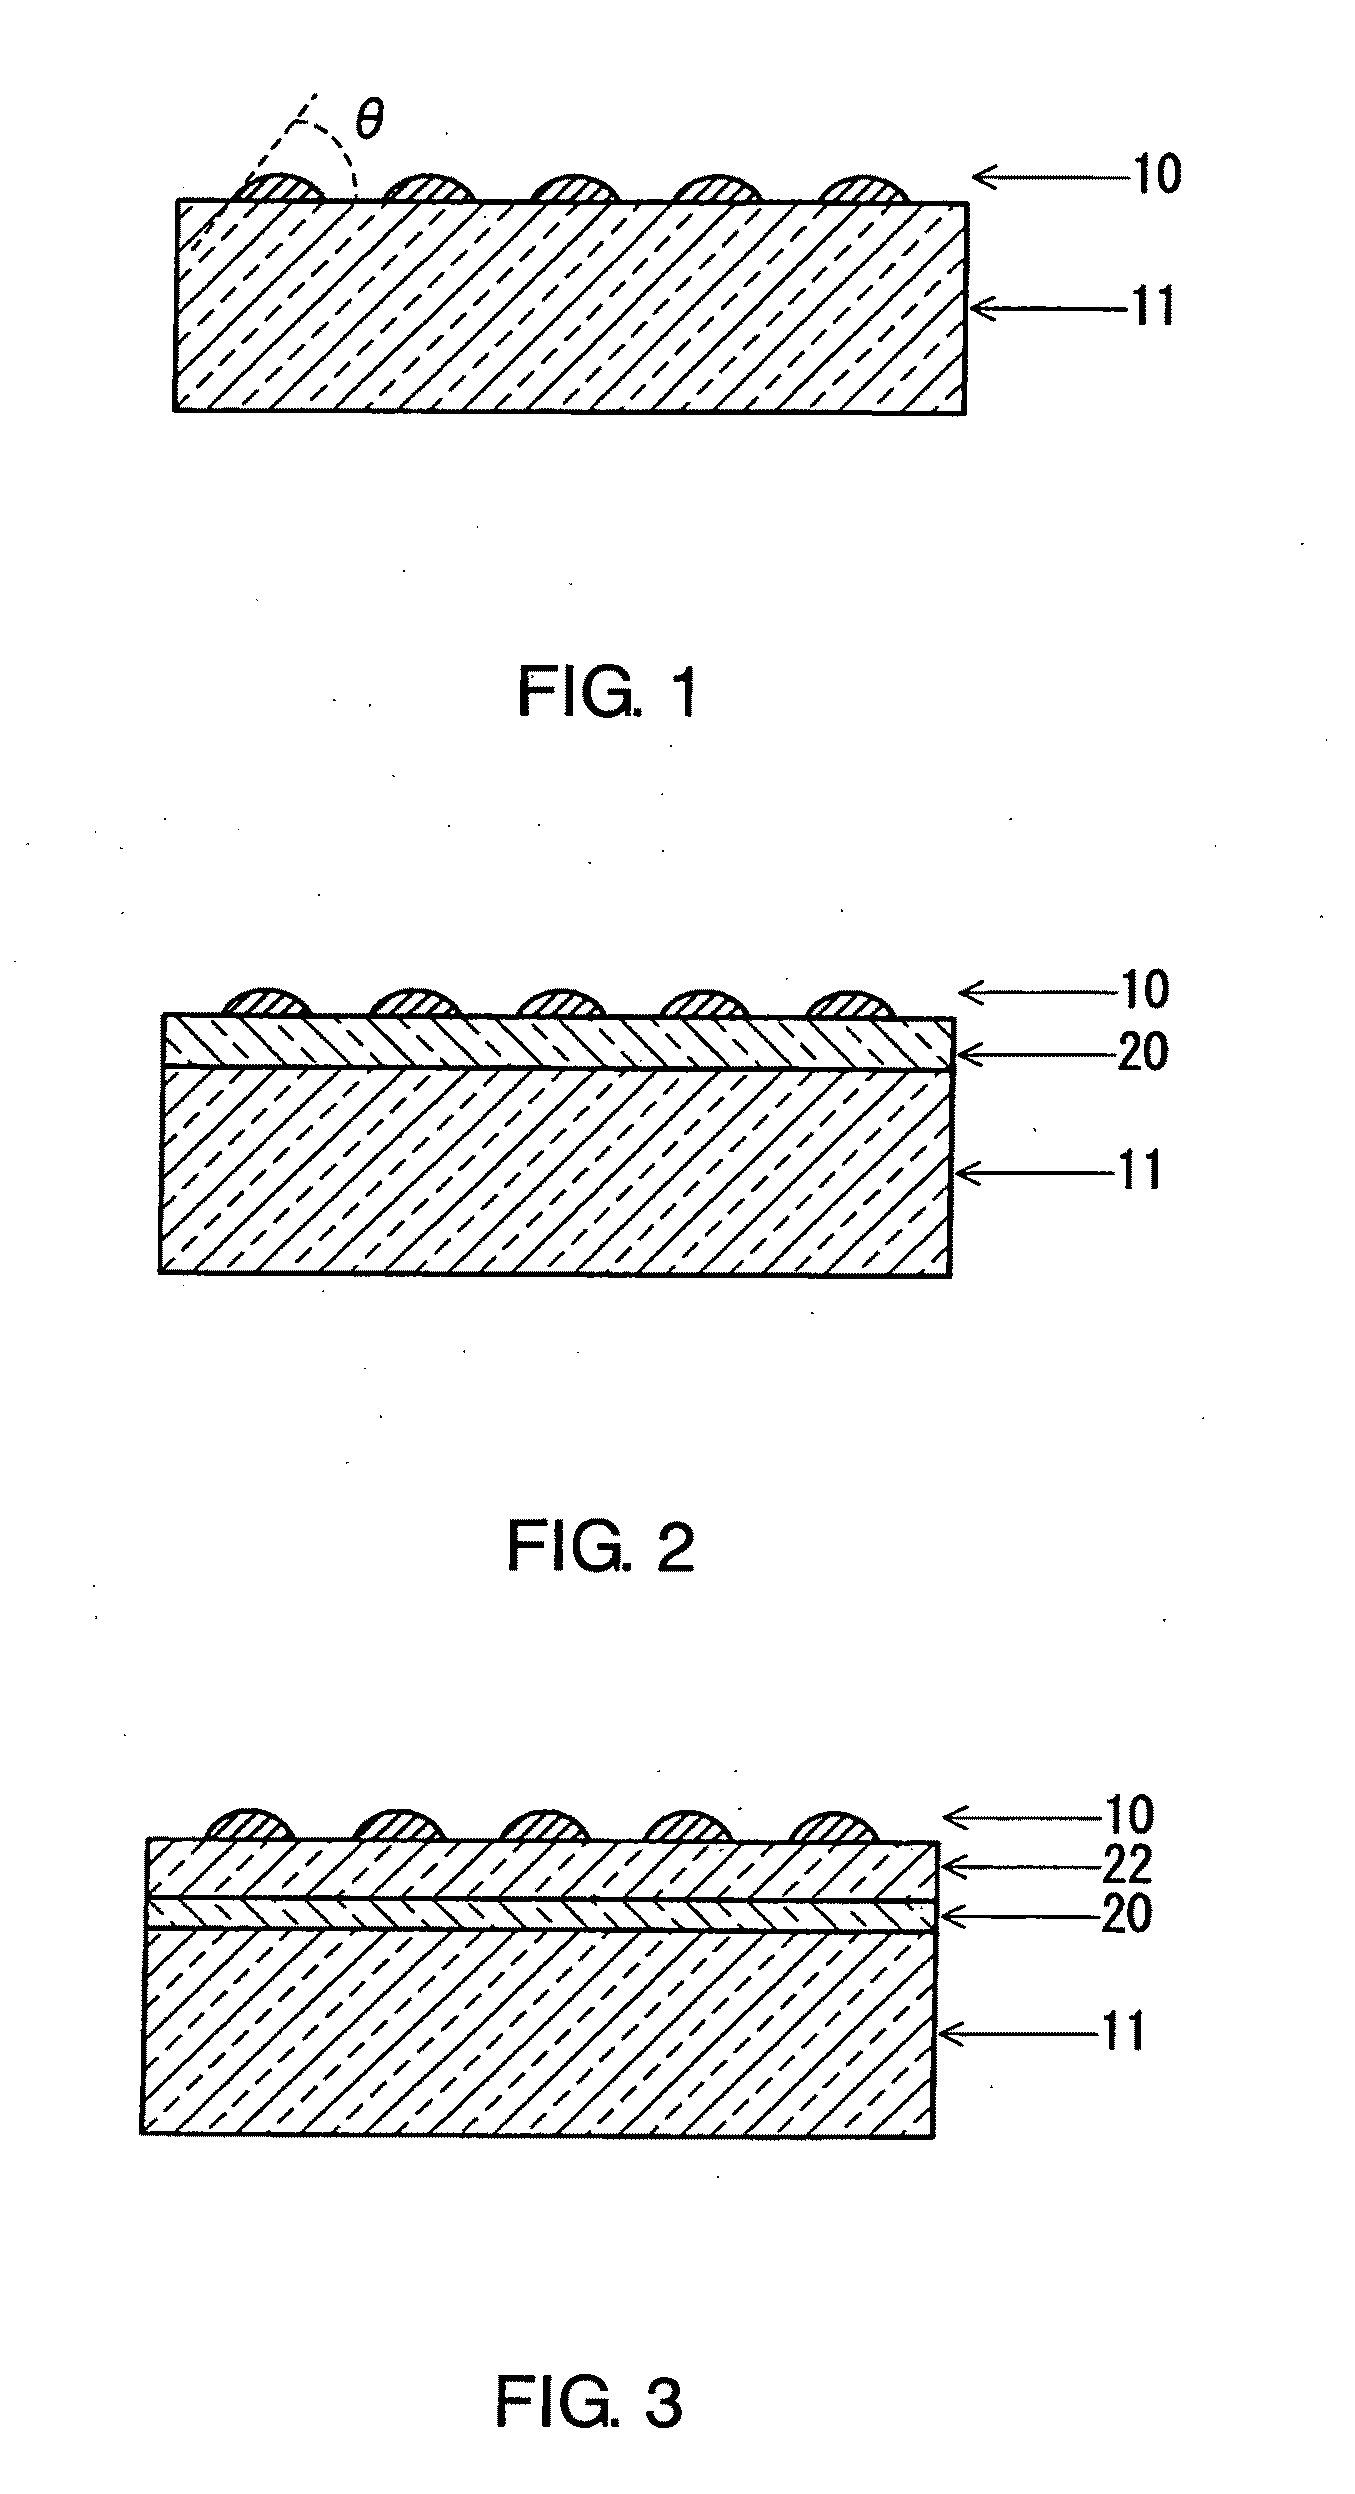 Antibacterial Substrate and Method of Manufacturing the Same